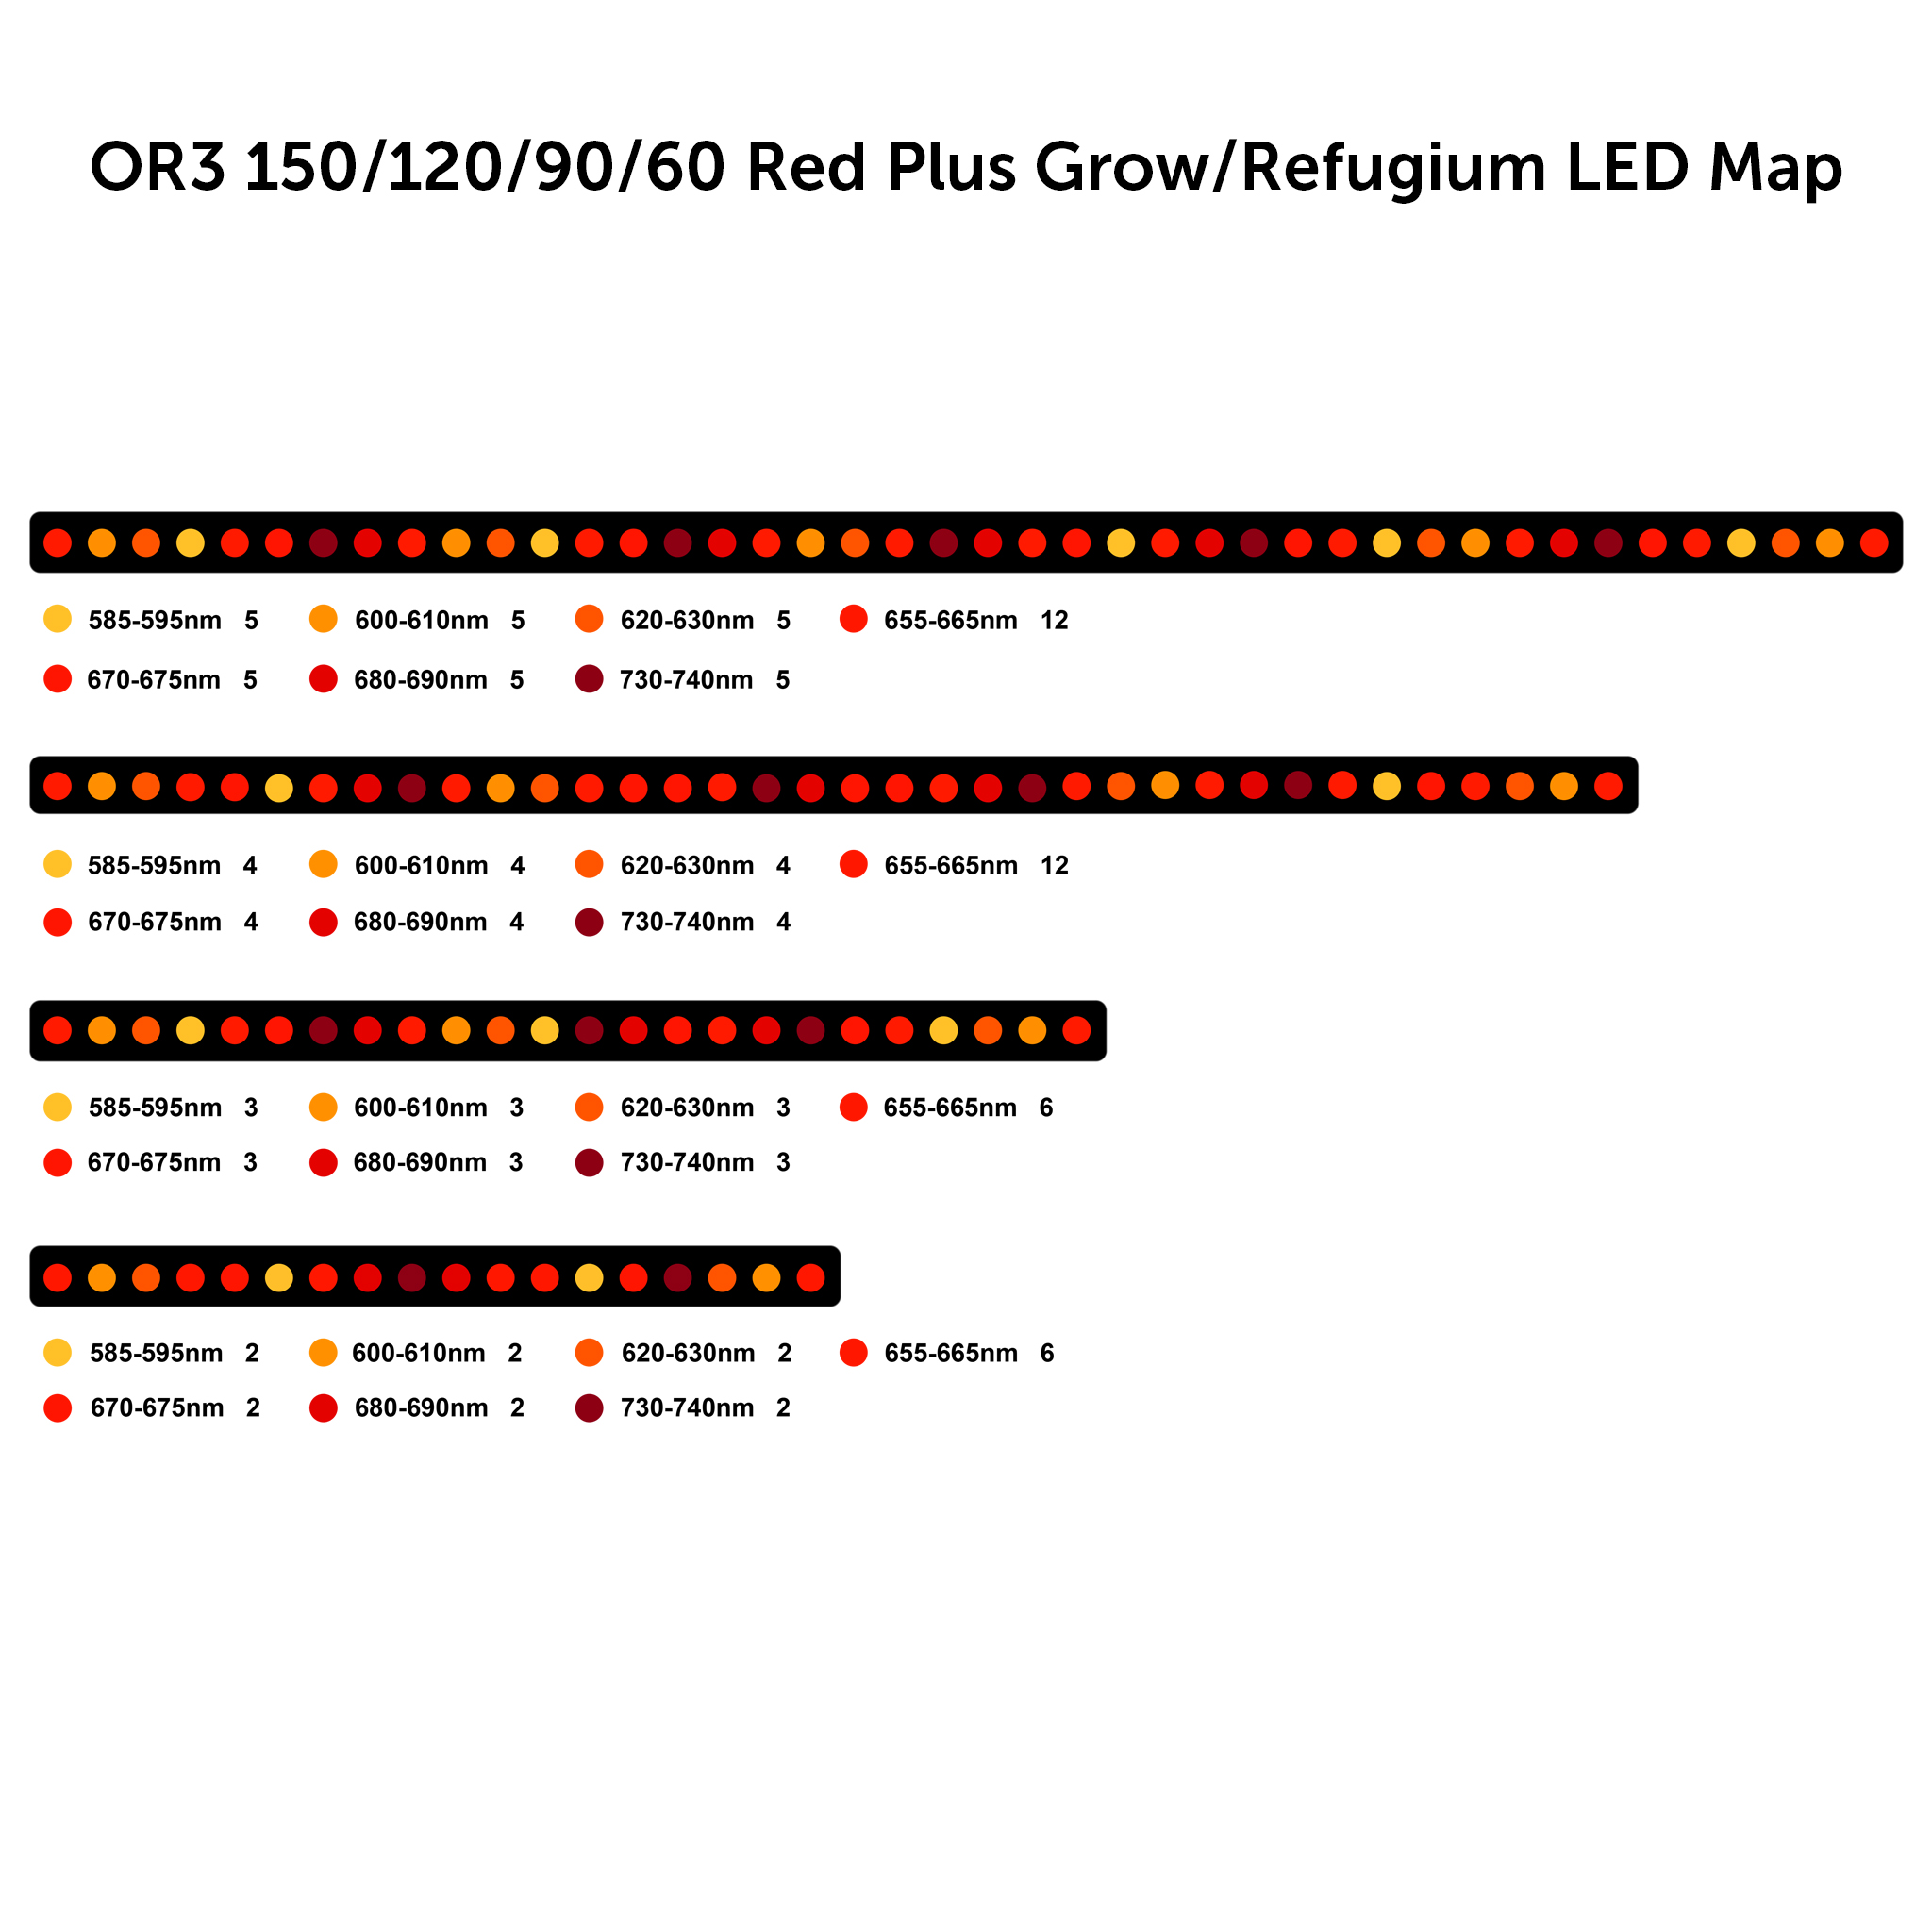 or3-red-plus-grow-refugium-led-map